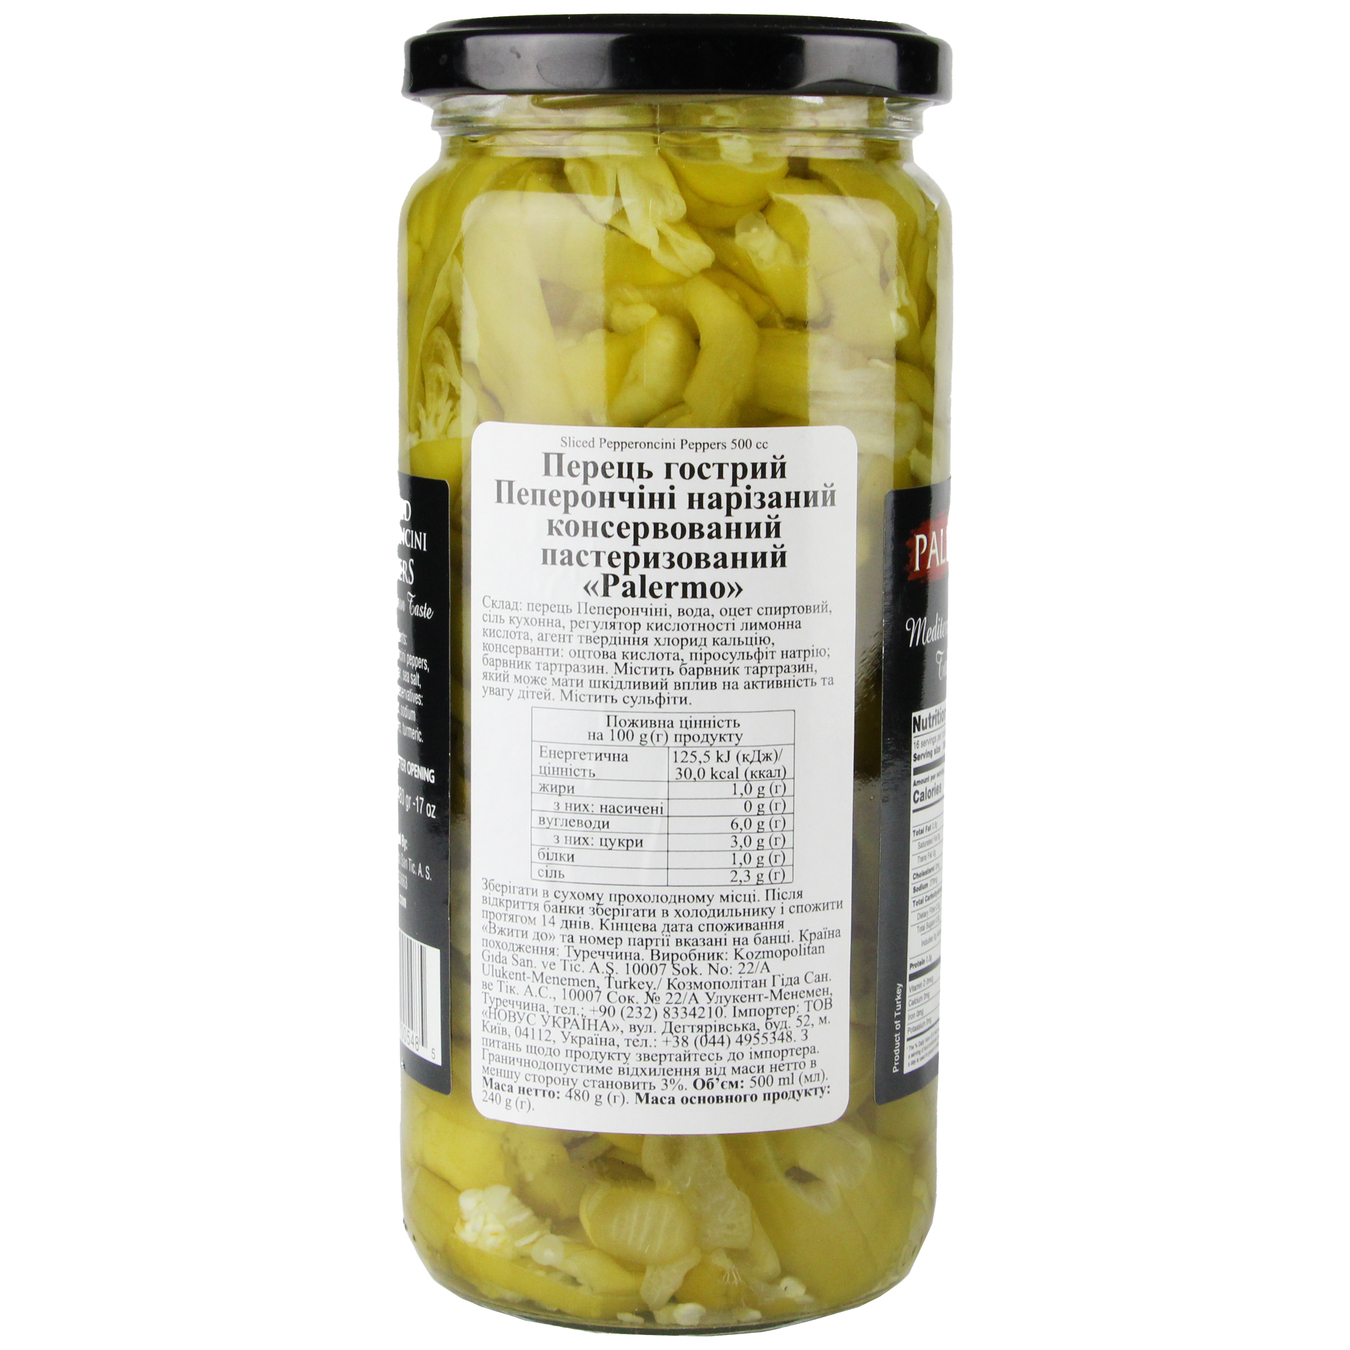 Palermo Pasteriuzed Sliced Pepperoncini Peppers 500ml 2